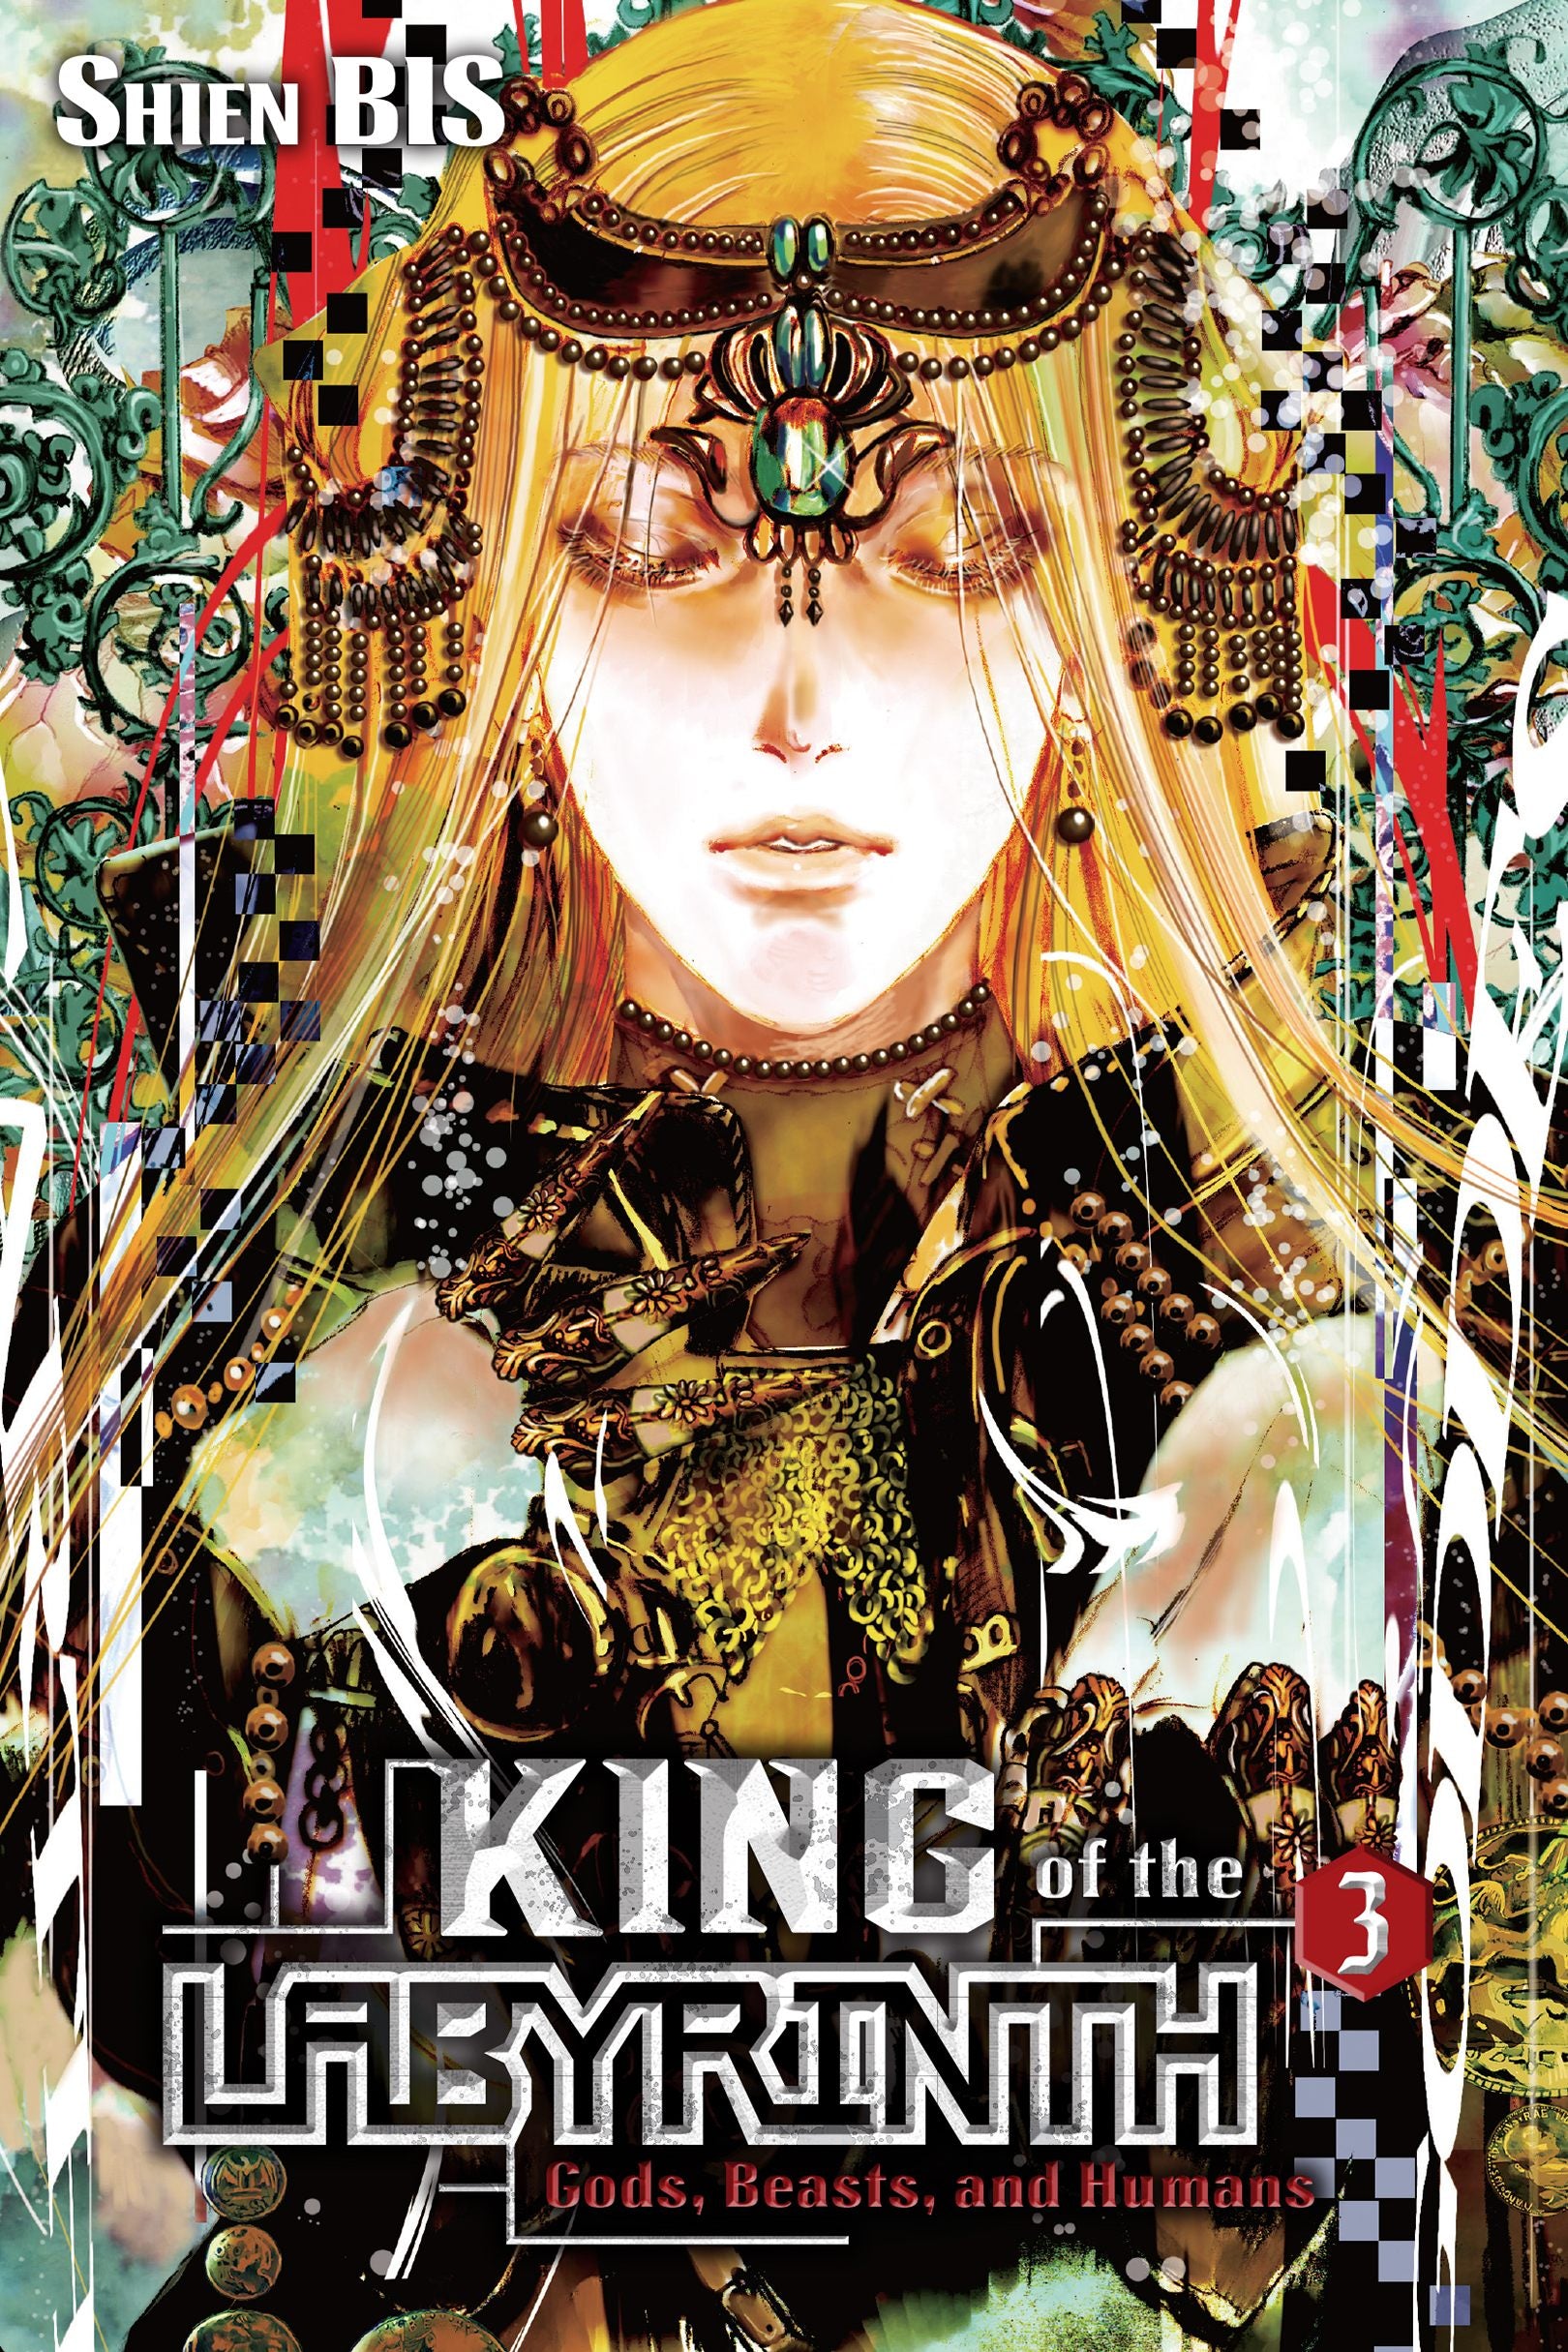 King of the Labyrinth Vol. 03 (Light Novel): Gods, Beasts, and Humans